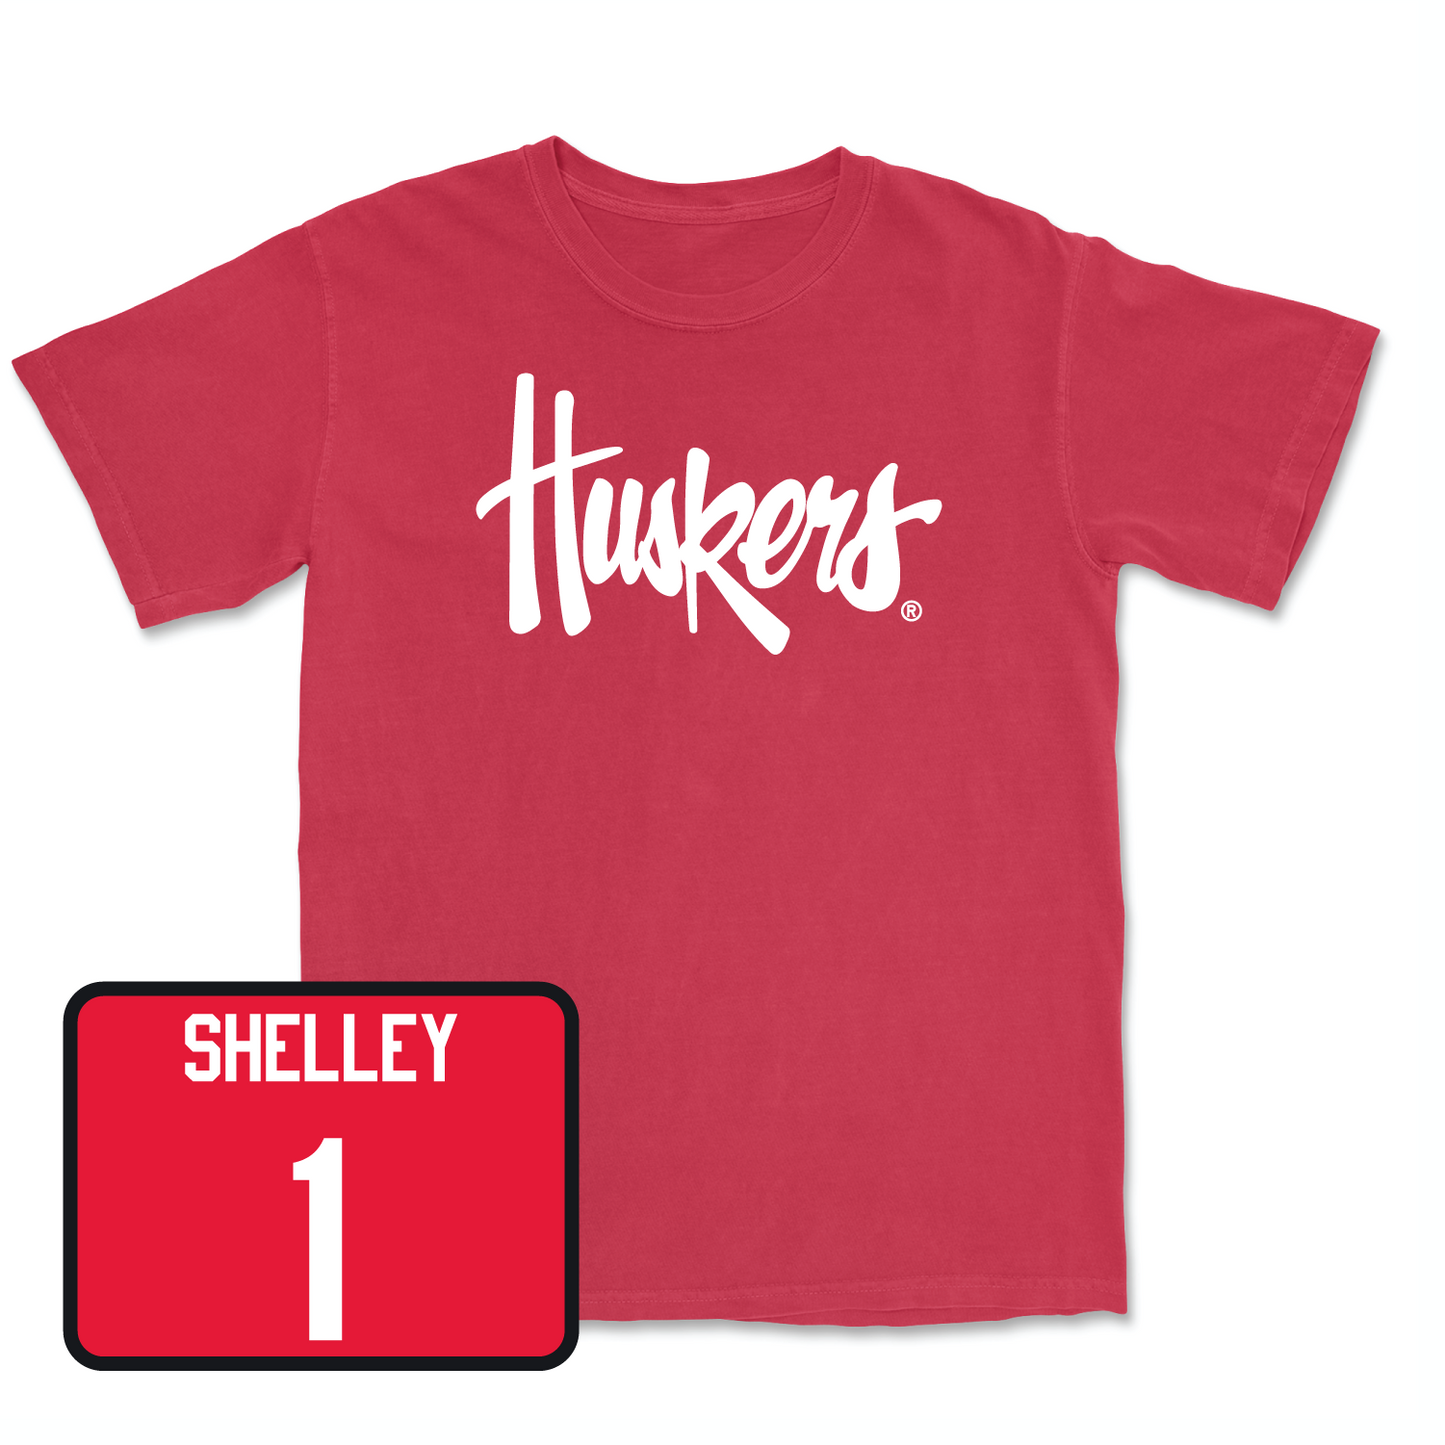 Red Women's Basketball Huskers Tee Youth Large / Jaz Shelley | #1